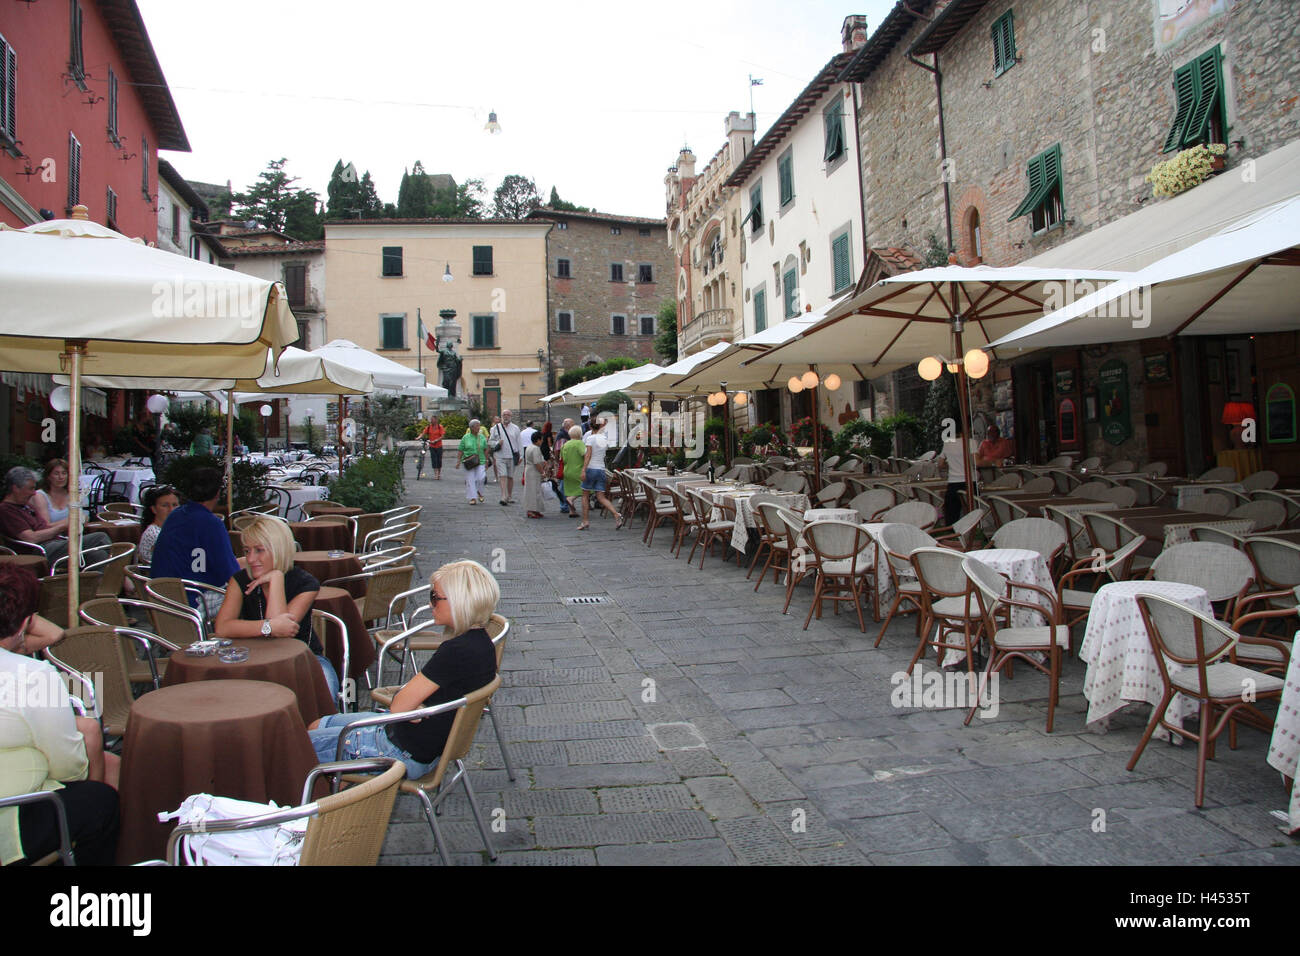 Italy, Tuscany, Montecatini Alto, Piazza Giuseppe Giusti, street cafe, tourist, town, destination, upper town, mountain village, houses, terrace, building, residential houses, architecture, cafes, bars, restaurants, sunshades, tables, chairs, outside, people, tourism, no model release, Stock Photo